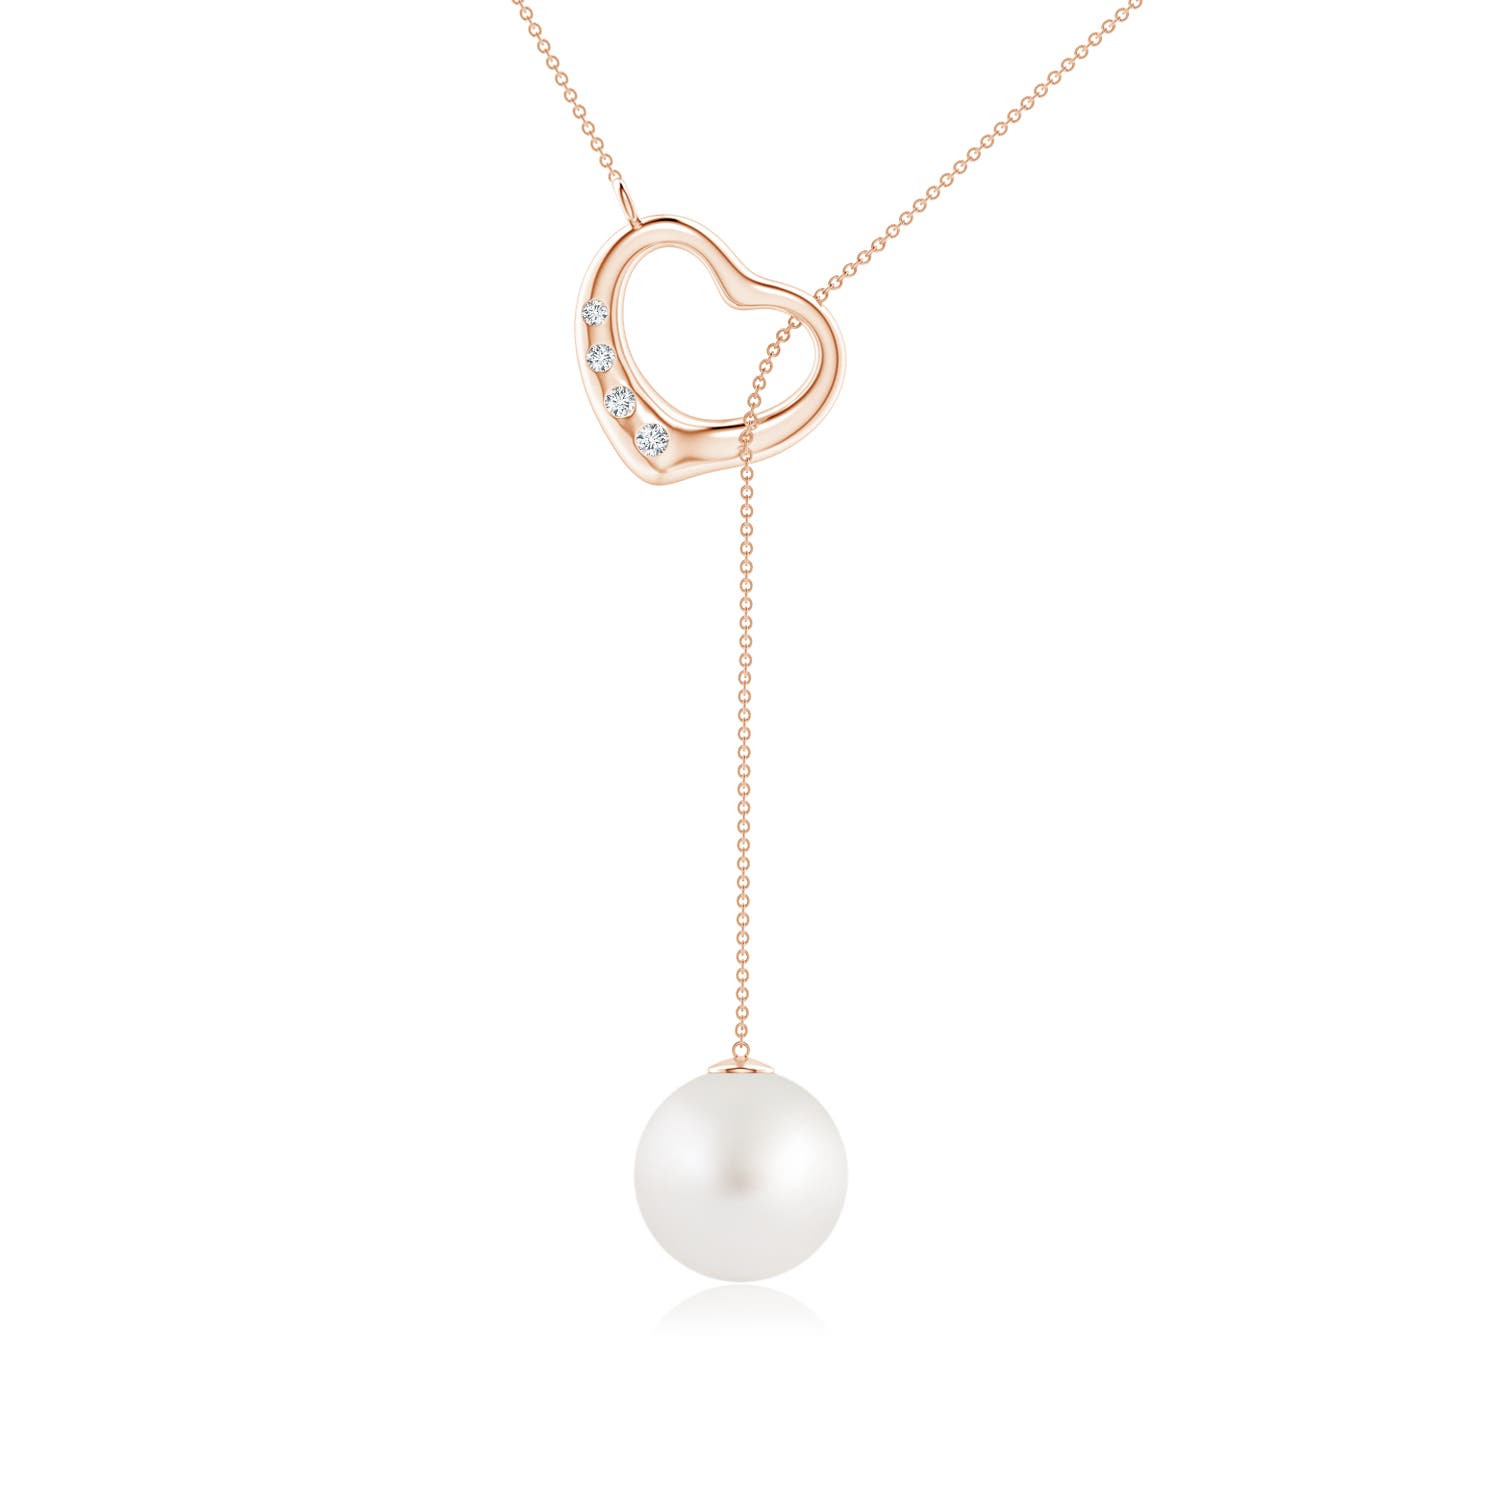 AA - South Sea Cultured Pearl / 5.28 CT / 14 KT Rose Gold